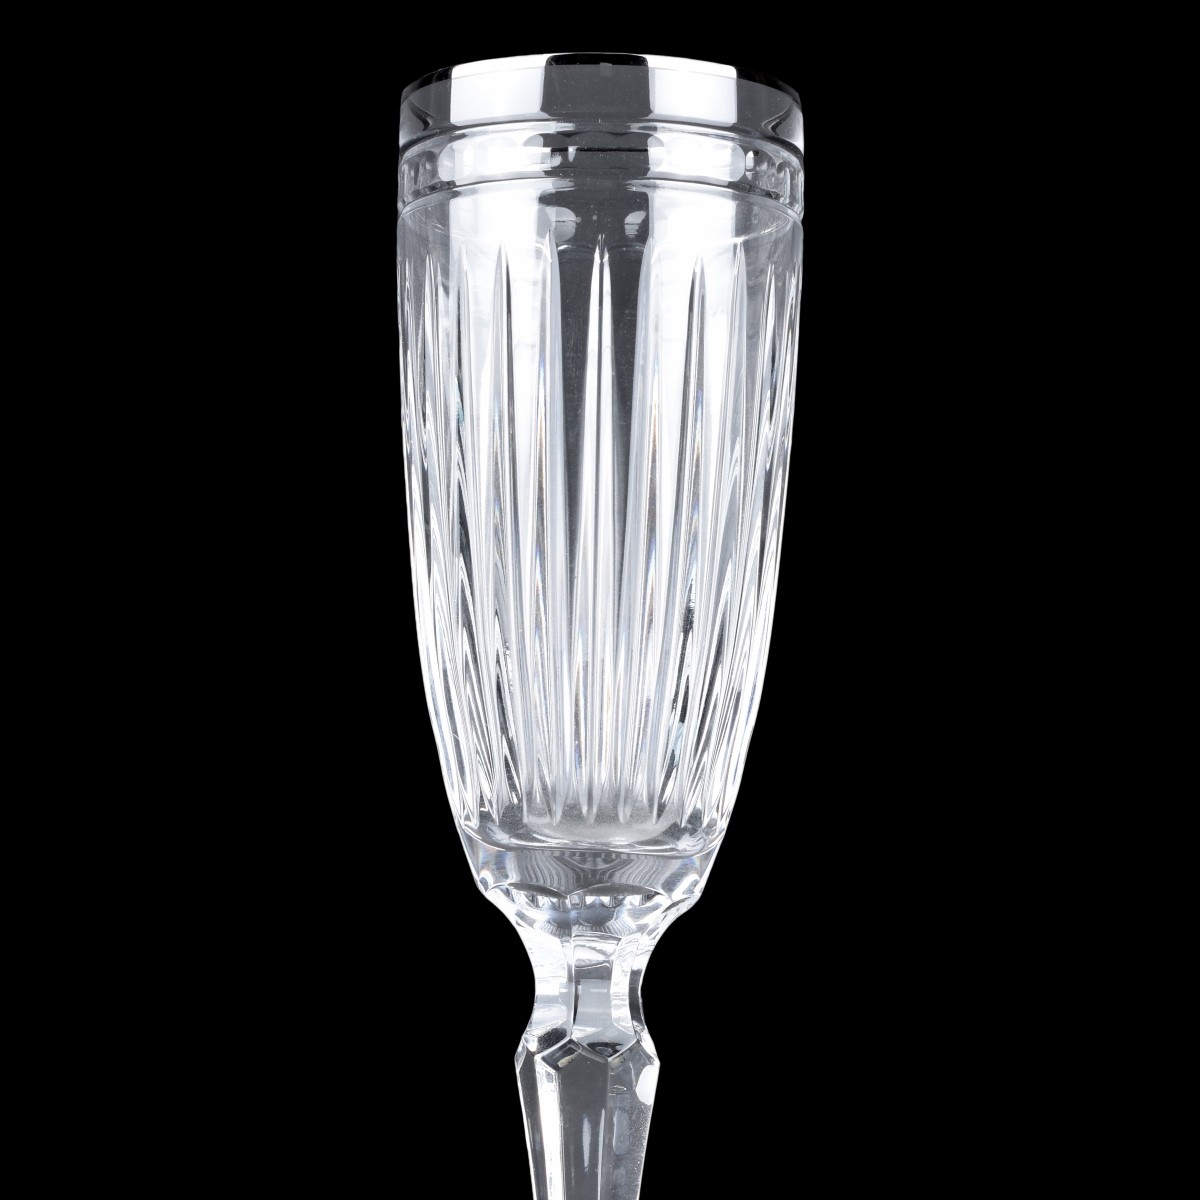 Four Waterford Hanover Platinum Champagne Flutes